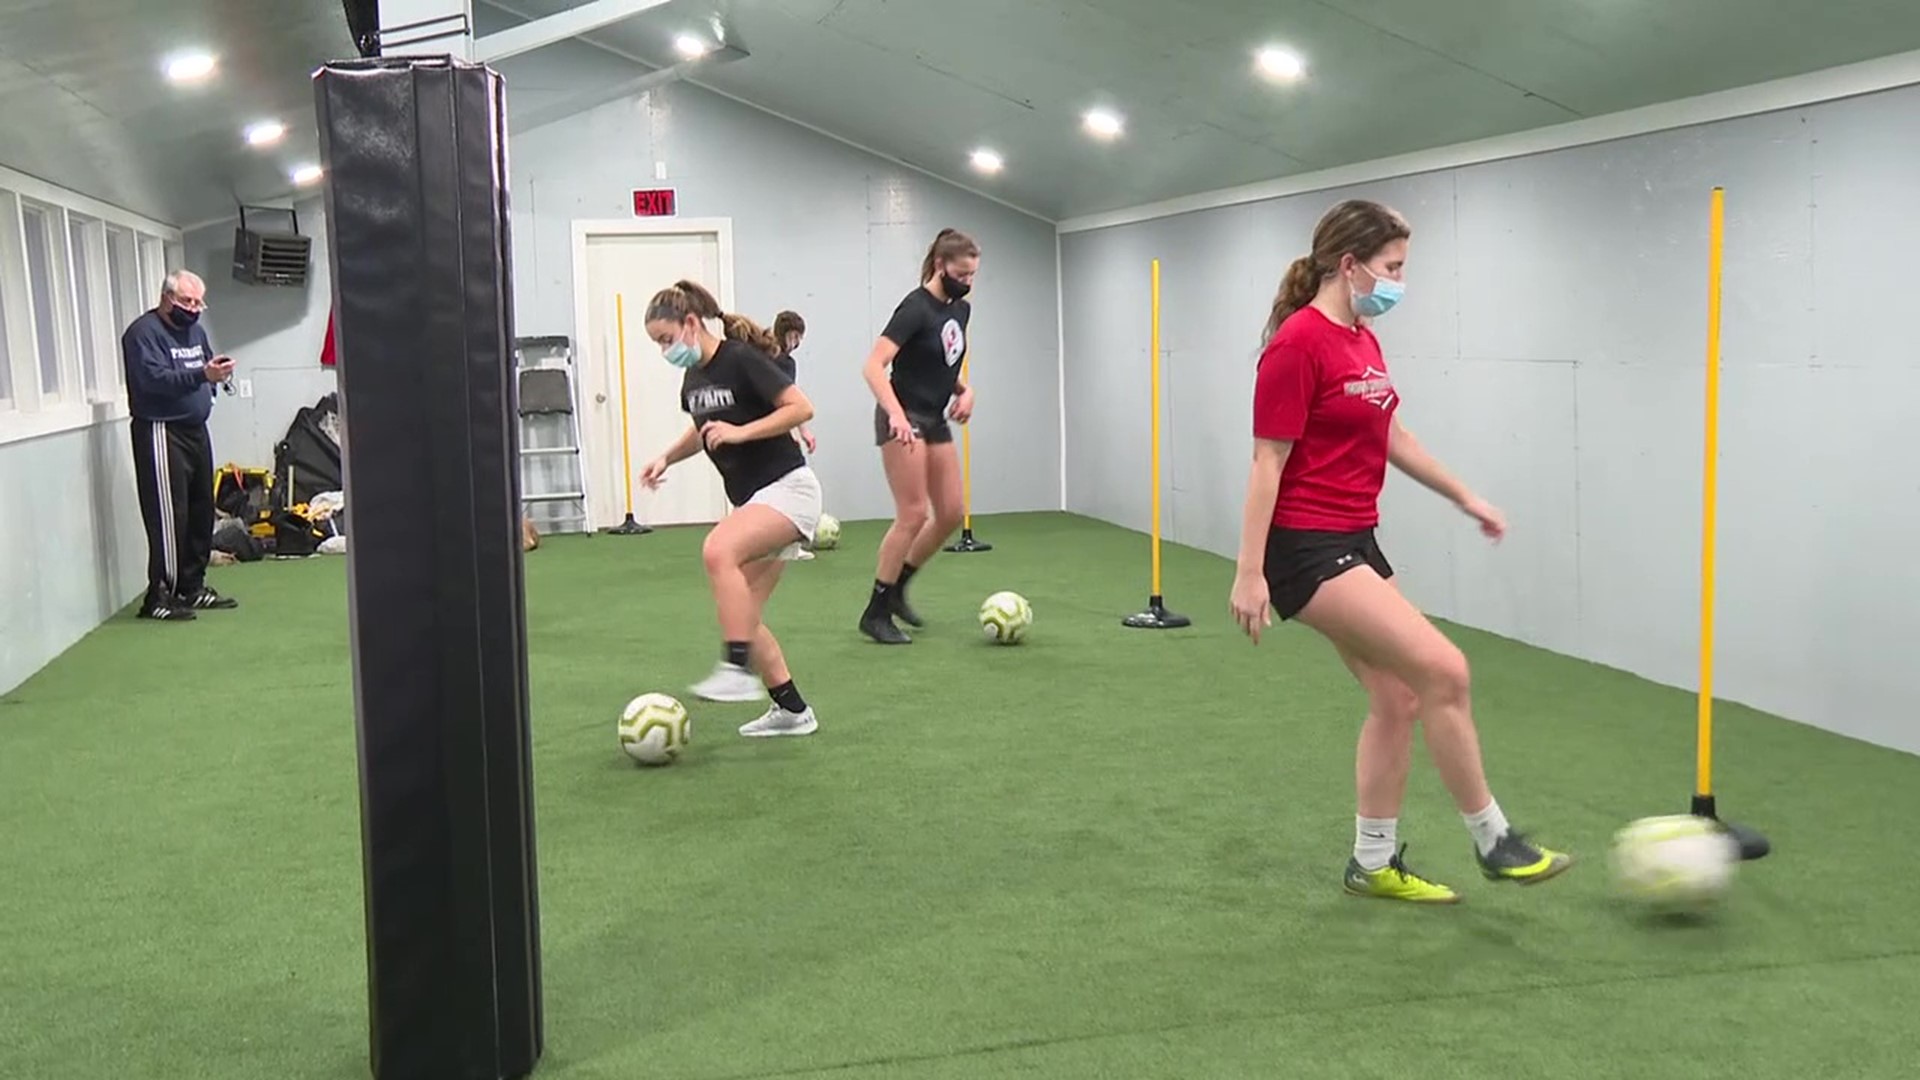 "Soccer in the Poconos" aims to provide soccer opportunities to the residents of the Pocono Mountains.